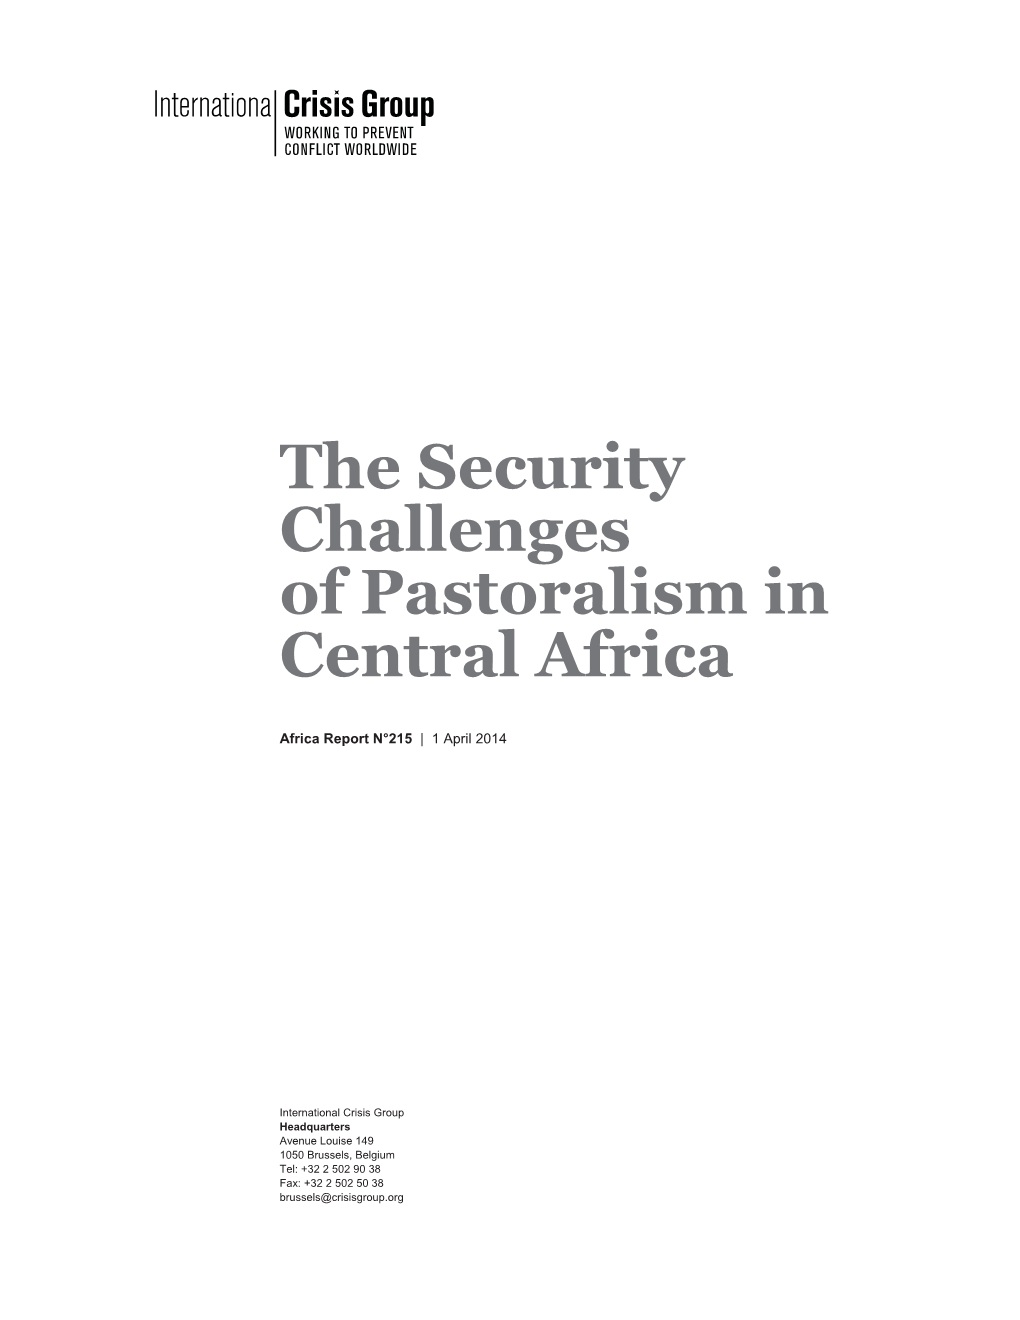 The Security Challenges of Pastoralism in Central Africa